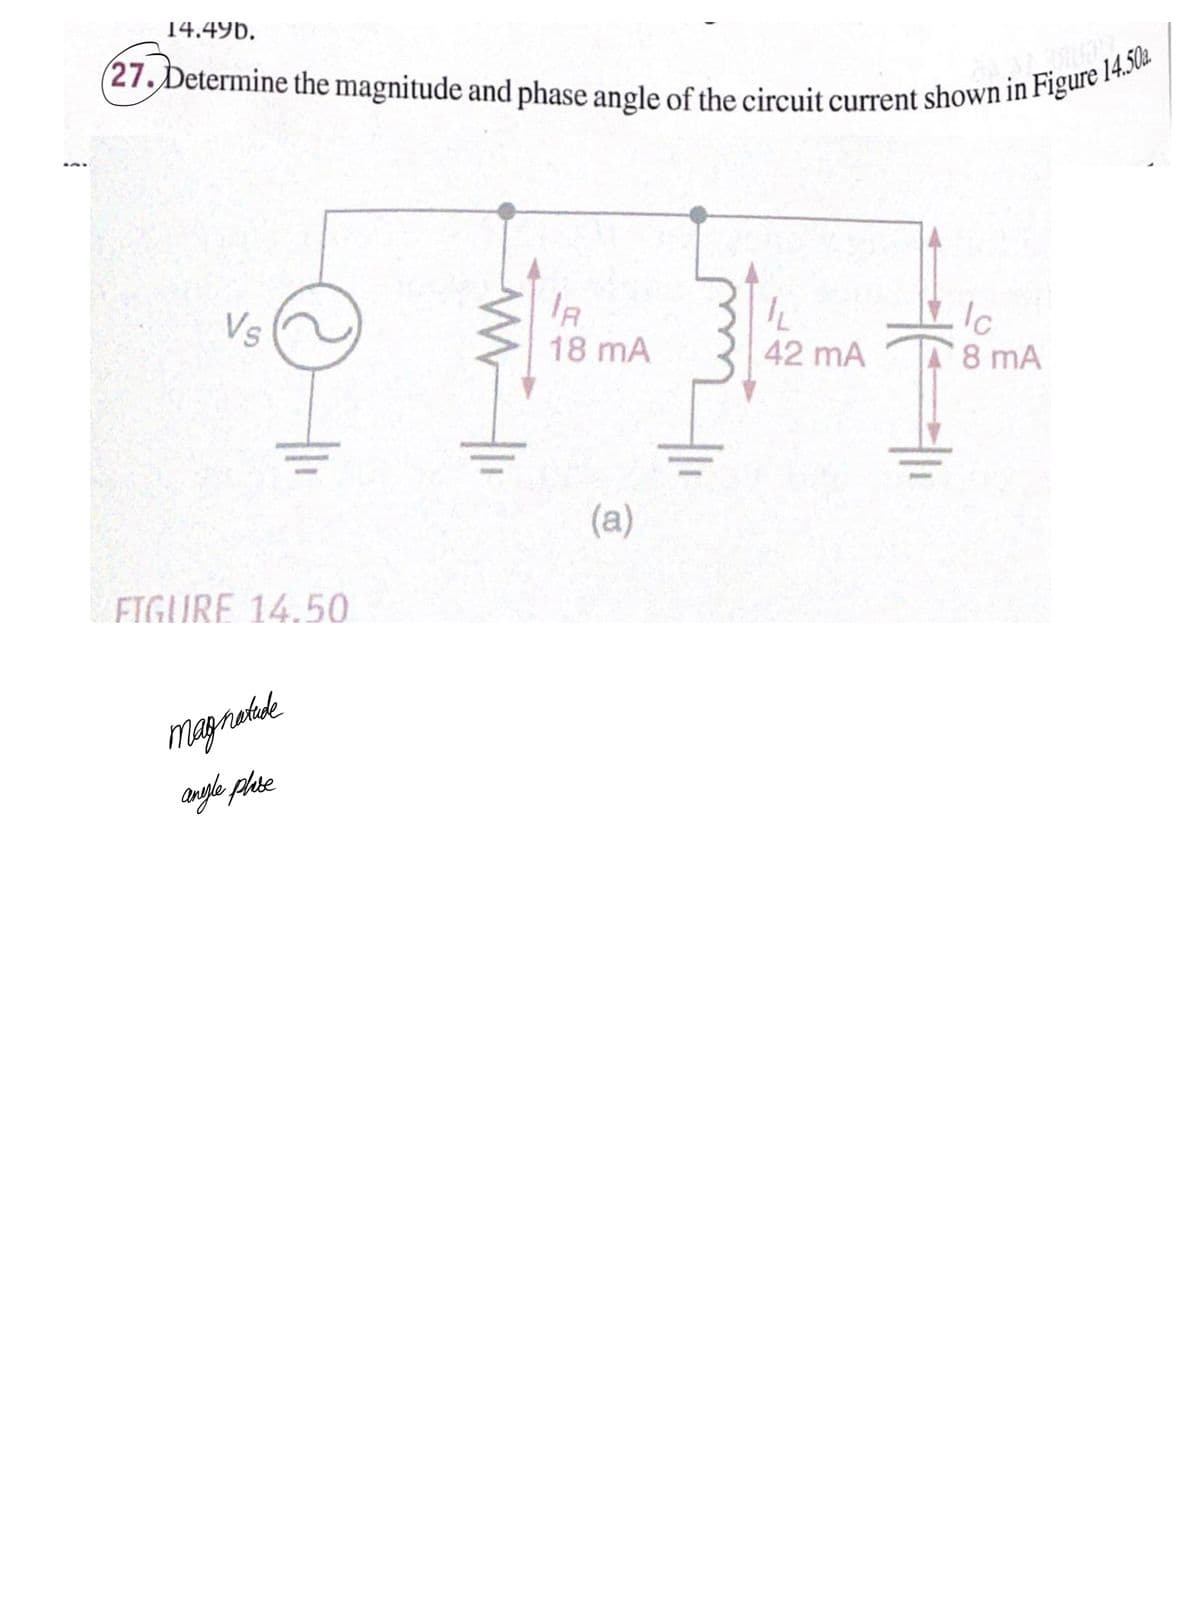 (27. Determine the magnitude and phase angle of the circuit current shown in Figure 14.50a
14.49b,
(27. Determine the magnitude and phase angle of the circuit current shown in Figule
IR
18 mA
Ic
8 mA
42 mA
(a)
FIGURE 14.50
magraak
anyle plase
